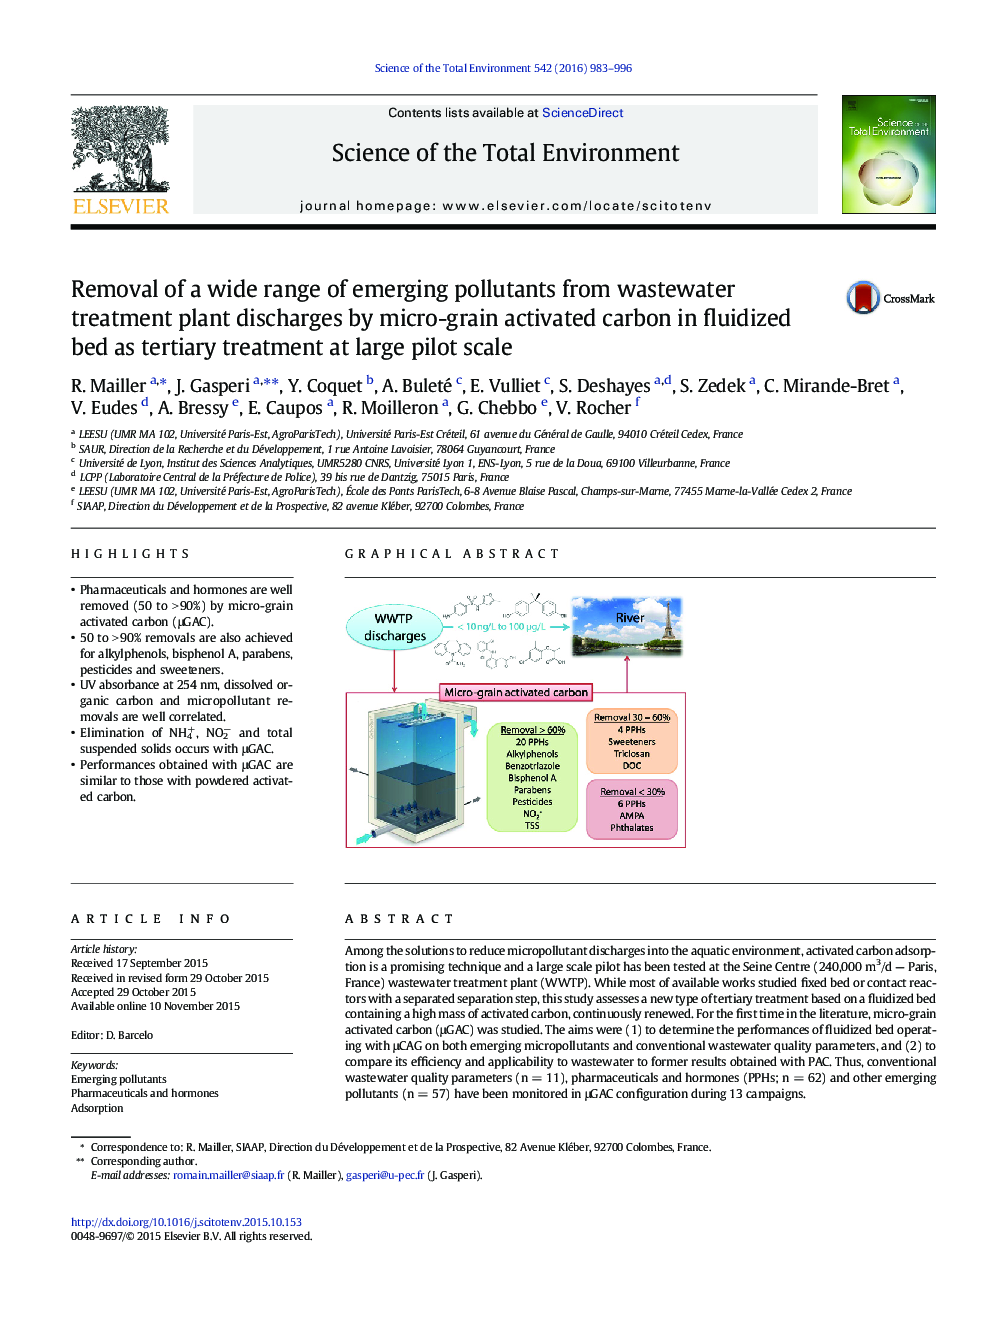 Removal of a wide range of emerging pollutants from wastewater treatment plant discharges by micro-grain activated carbon in fluidized bed as tertiary treatment at large pilot scale